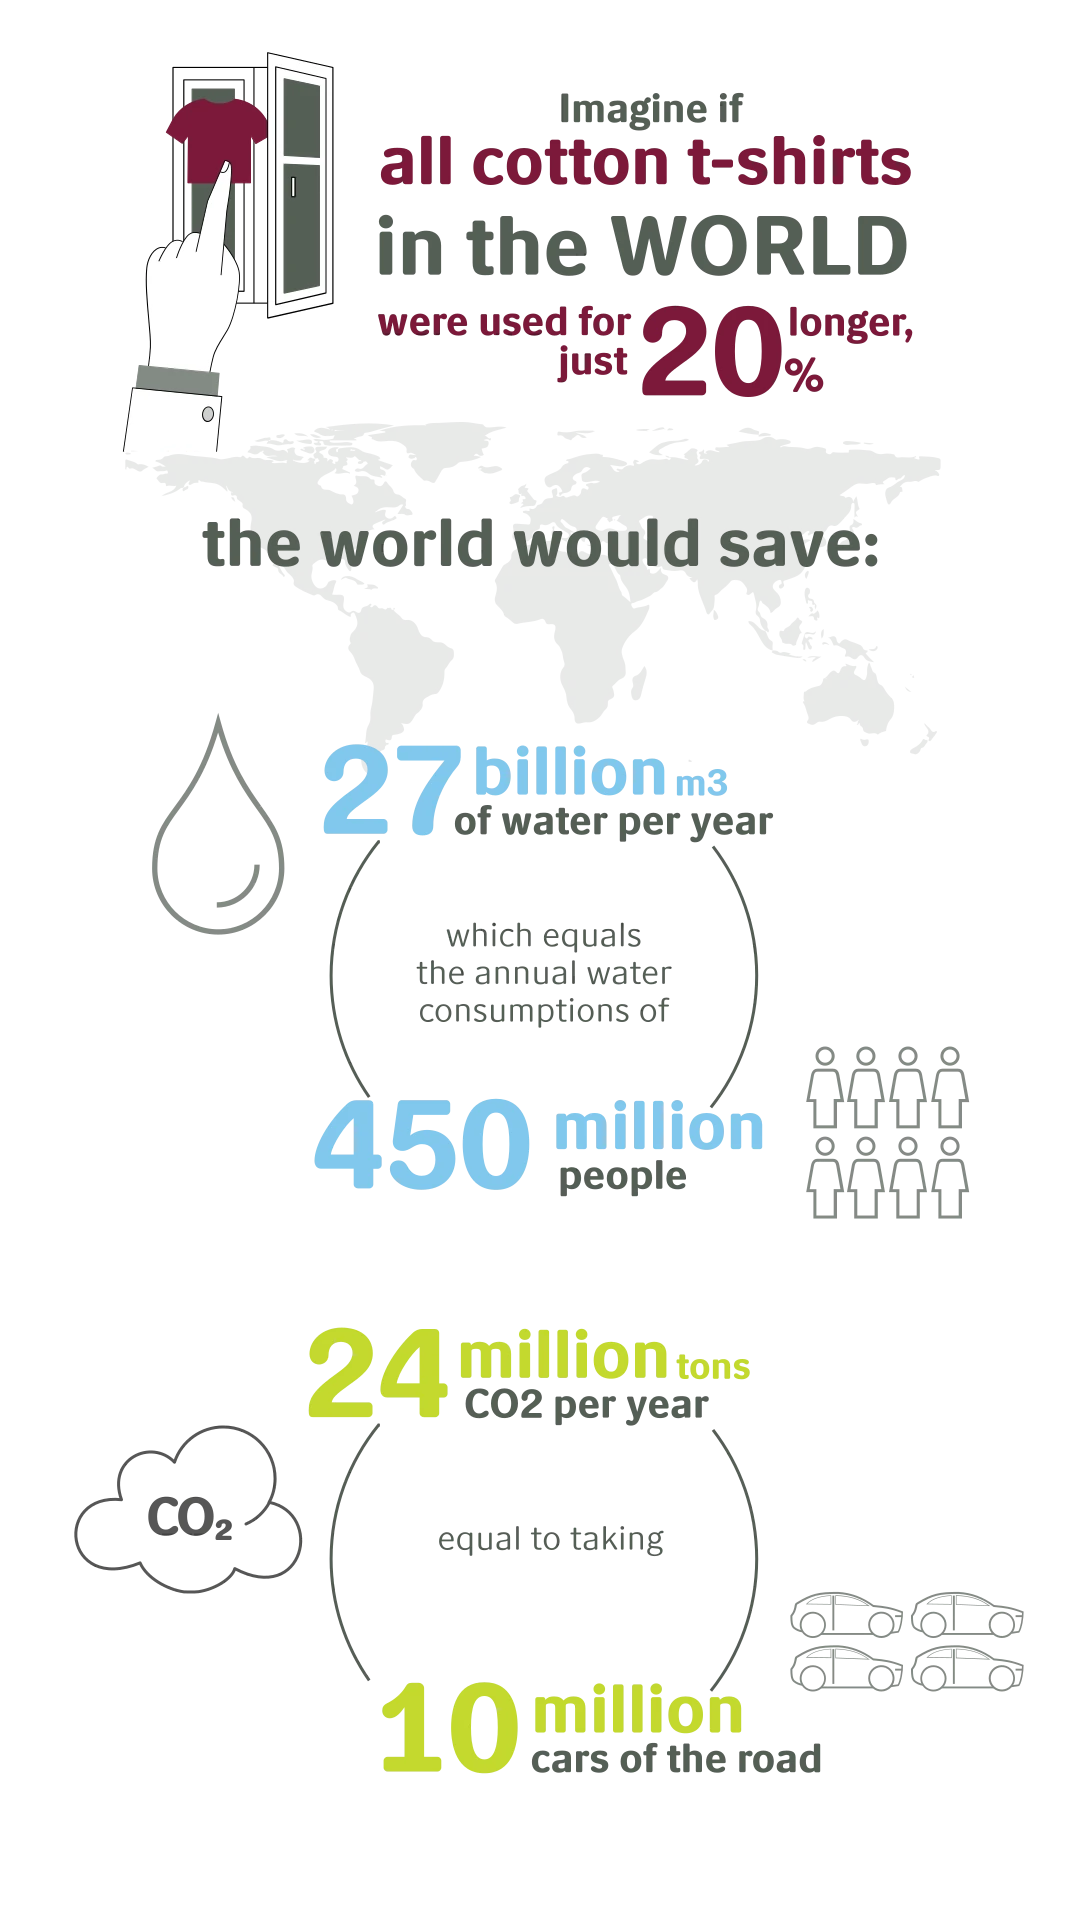 sustainabililty campaign infographic